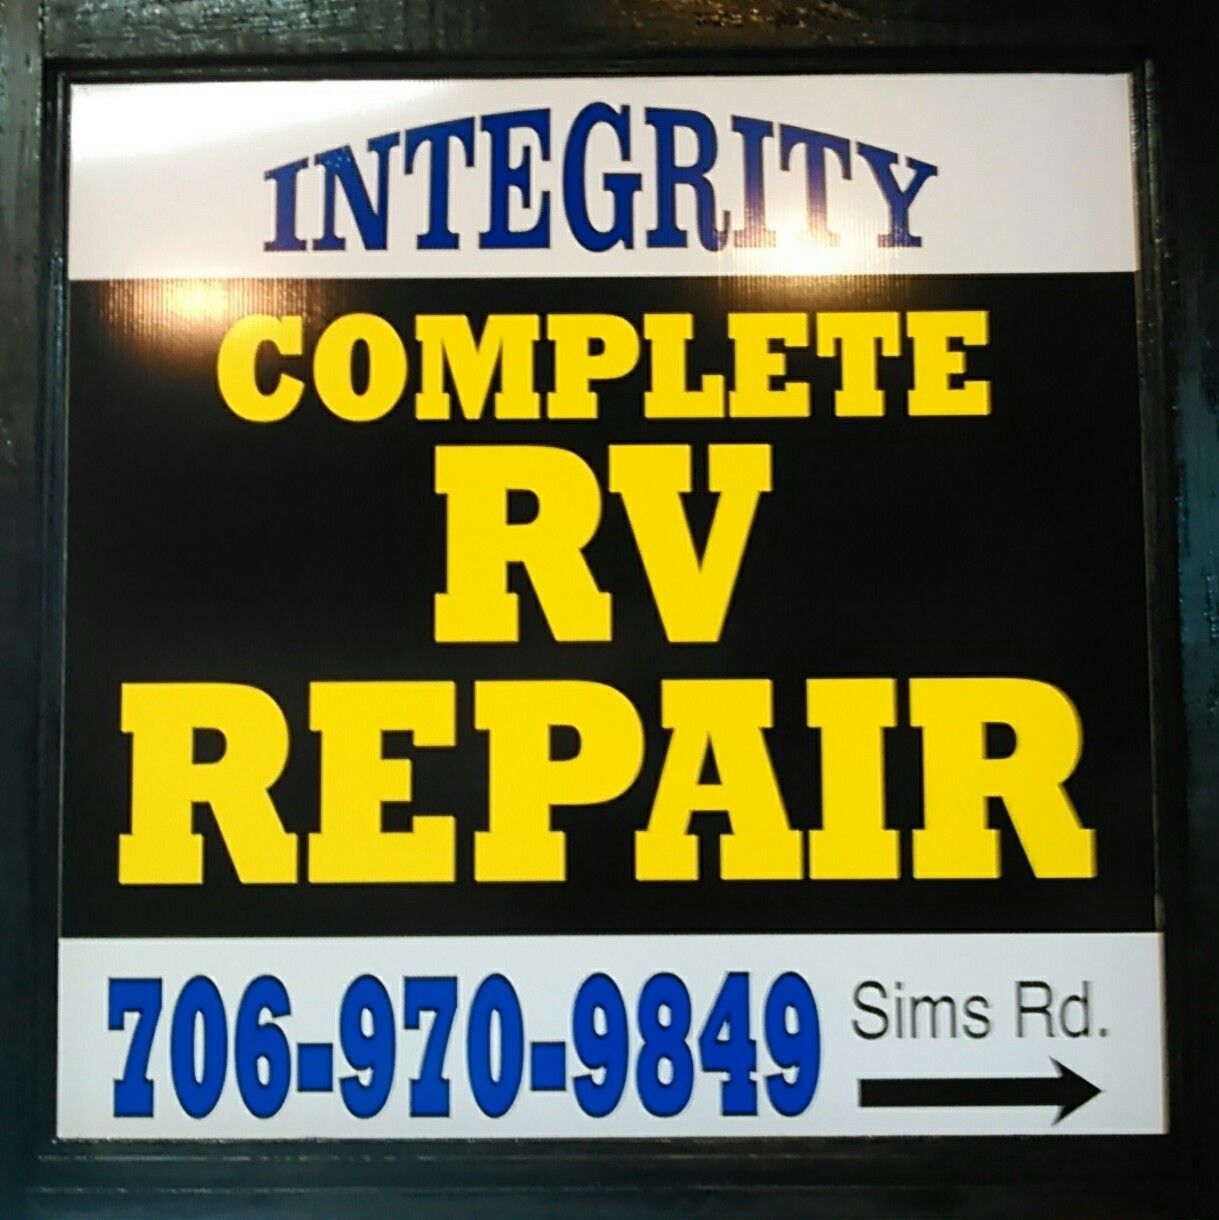 Services & Products Integrity Complete RV Repair in Hiawassee GA